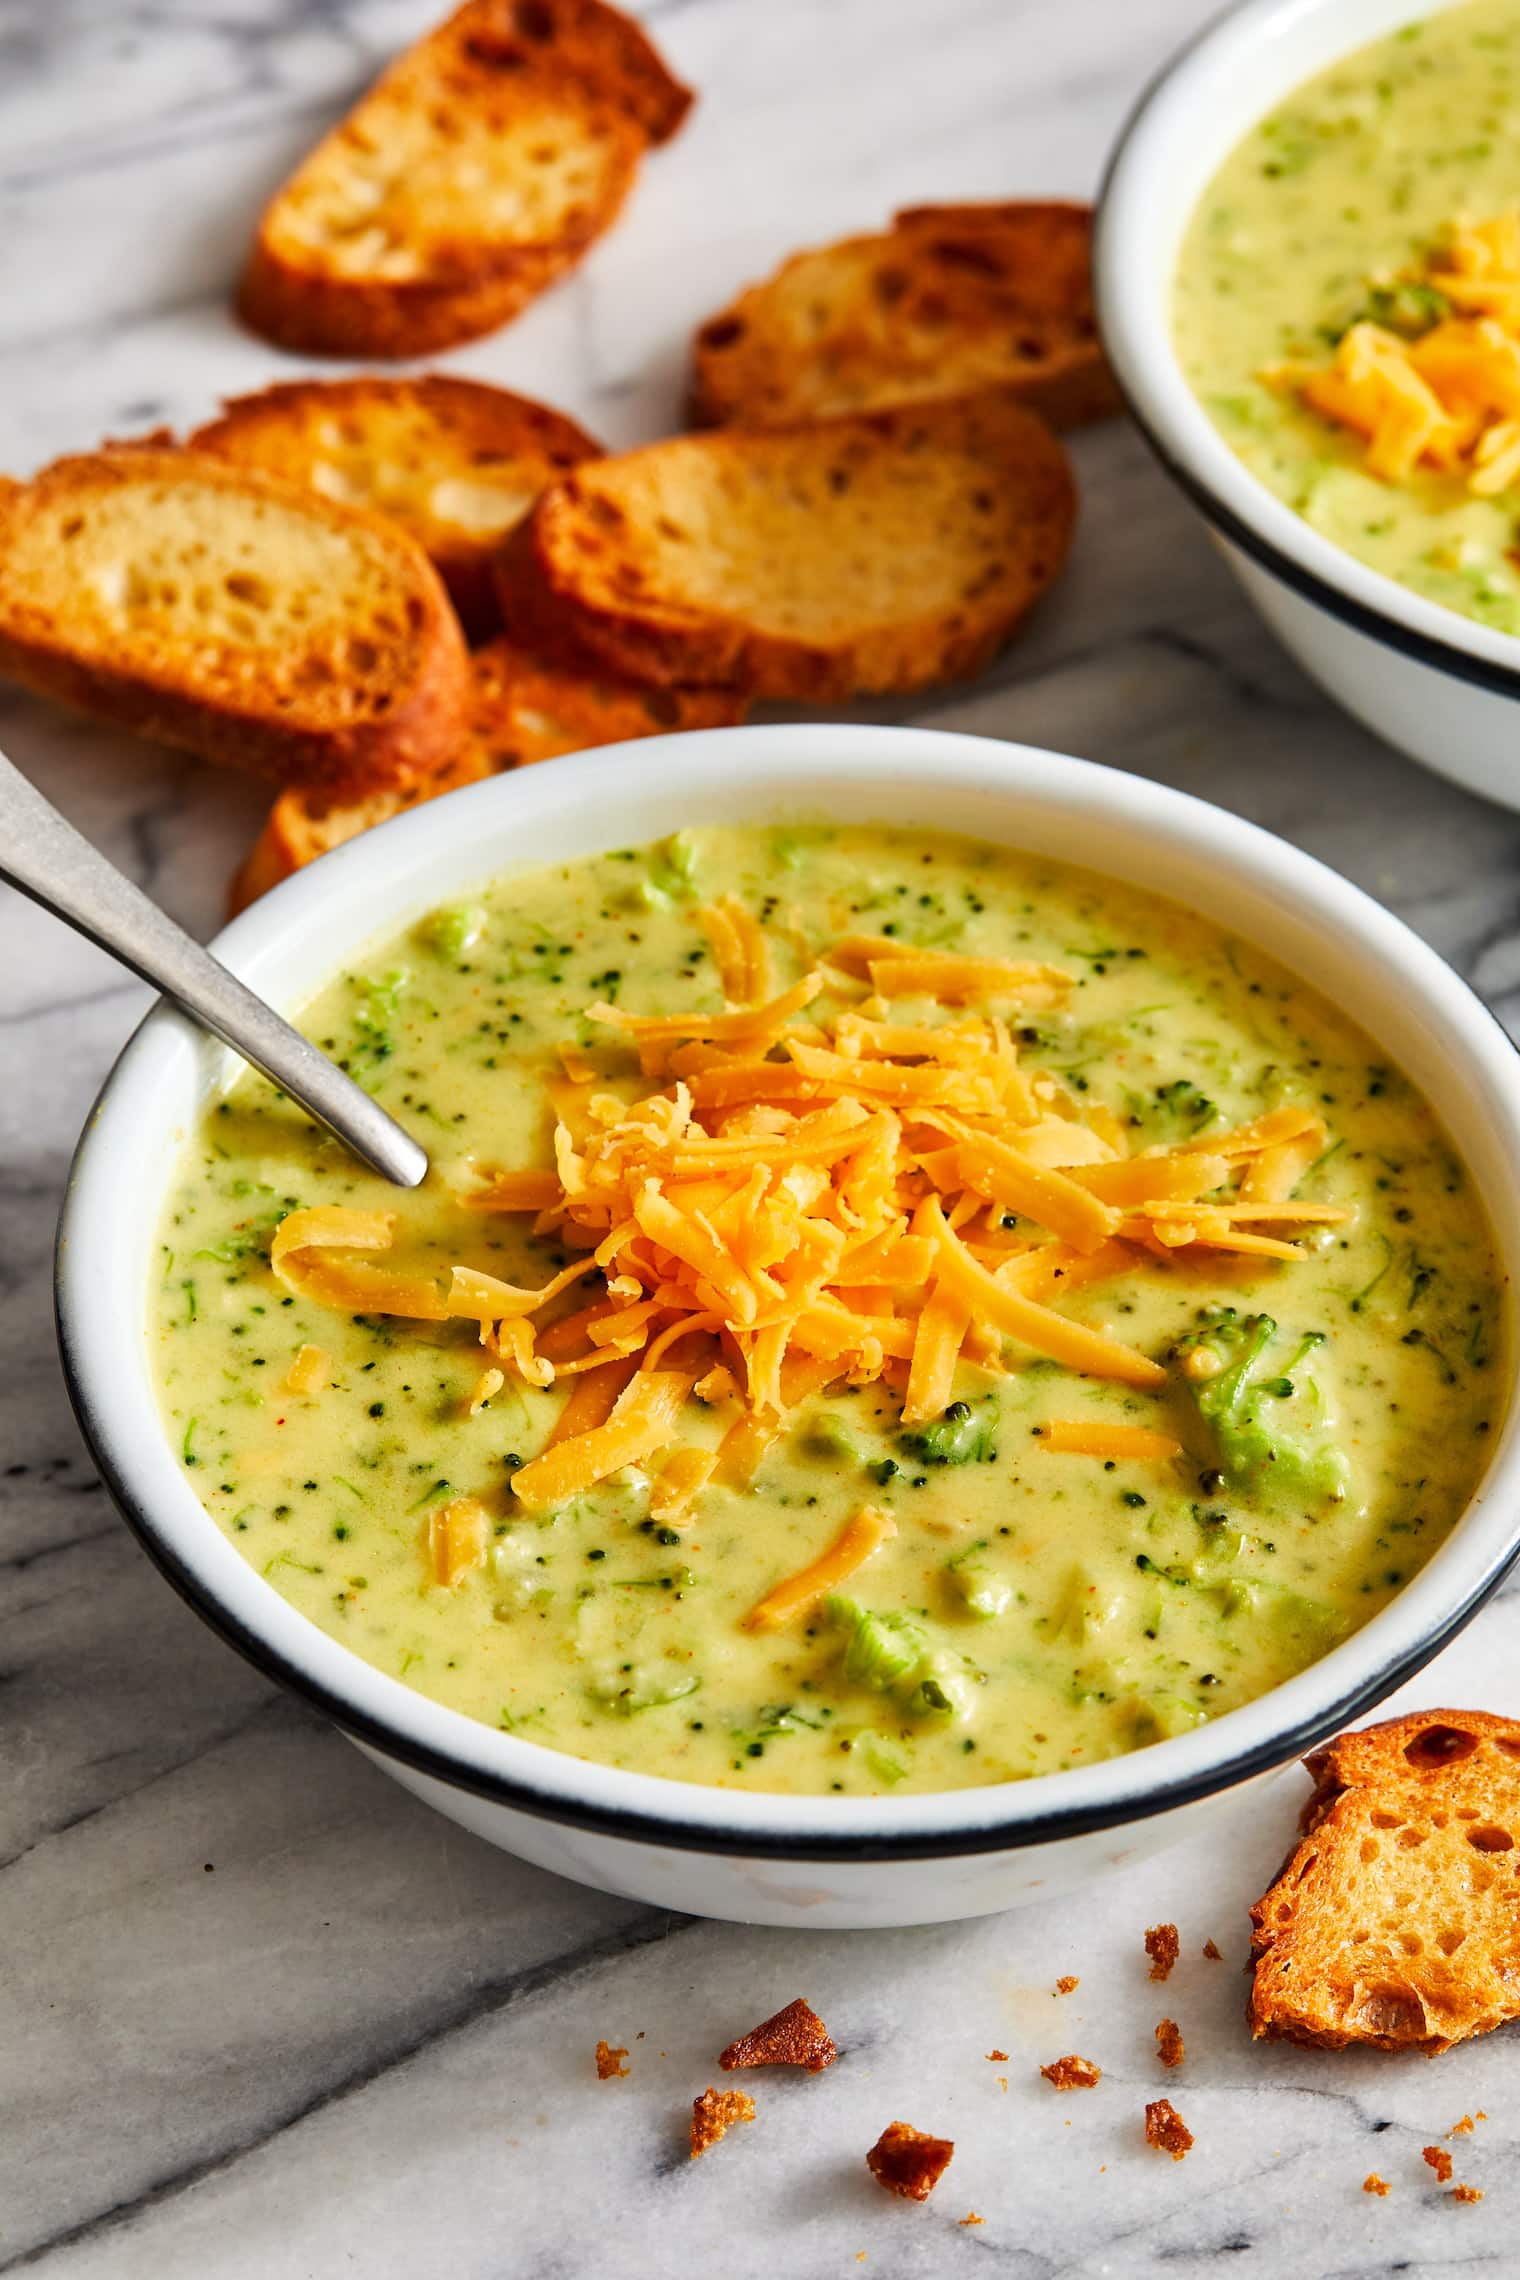 https://s23209.pcdn.co/wp-content/uploads/2022/12/211129_DAMN-DELICIOUS_Broccoli-Cheddar-Soup_307.jpg